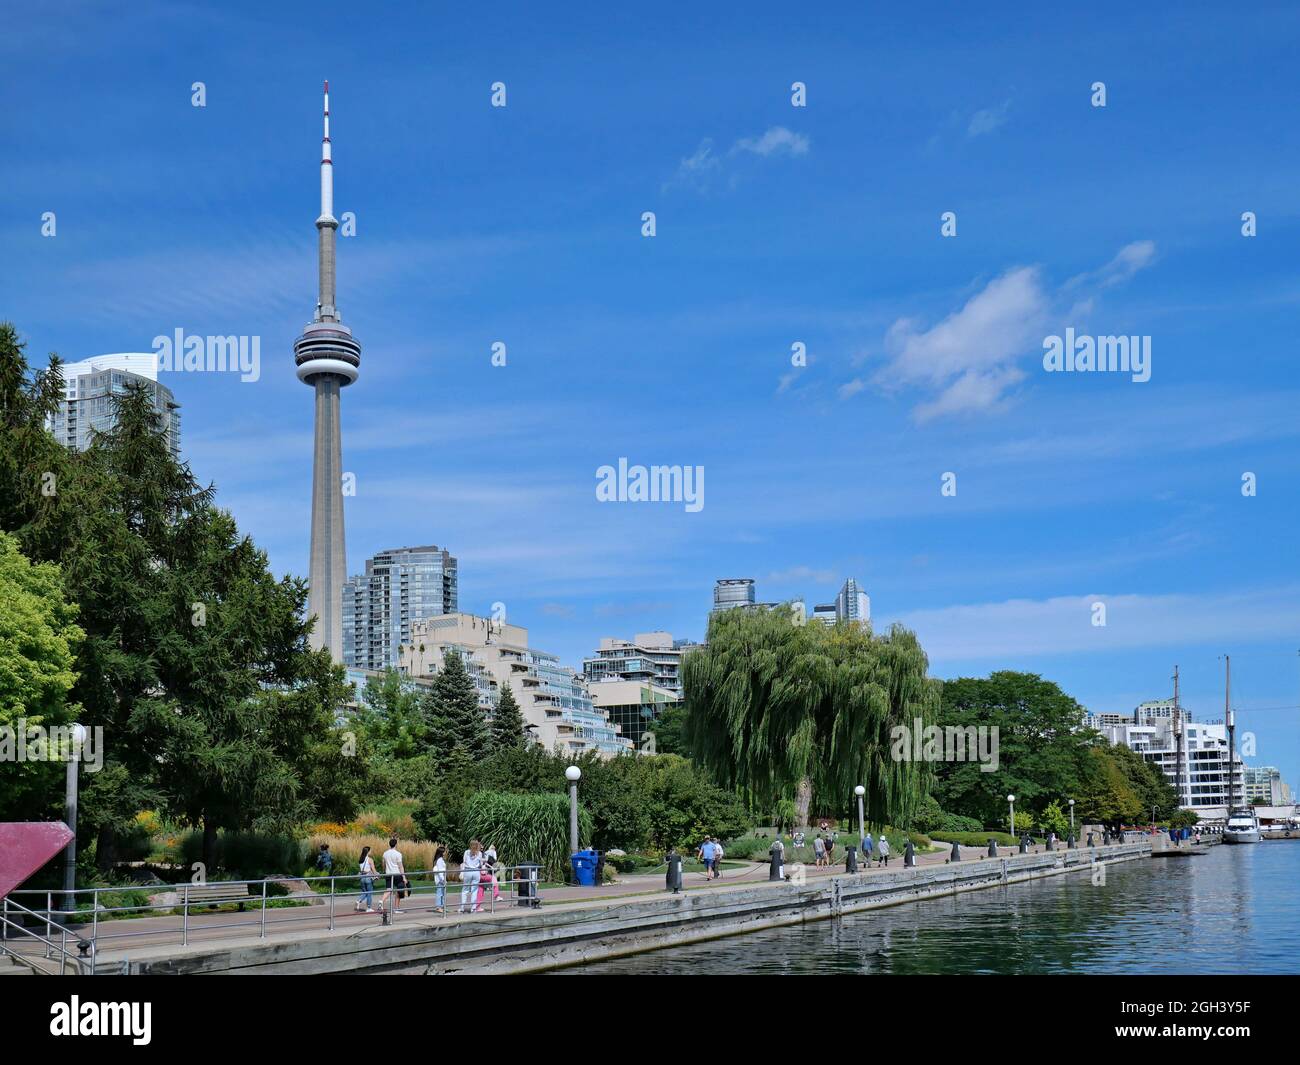 Toronto, Canada - September 3, 2021:  Lake Ontario waterfront promenade with high rise apartment buildings in the background Stock Photo